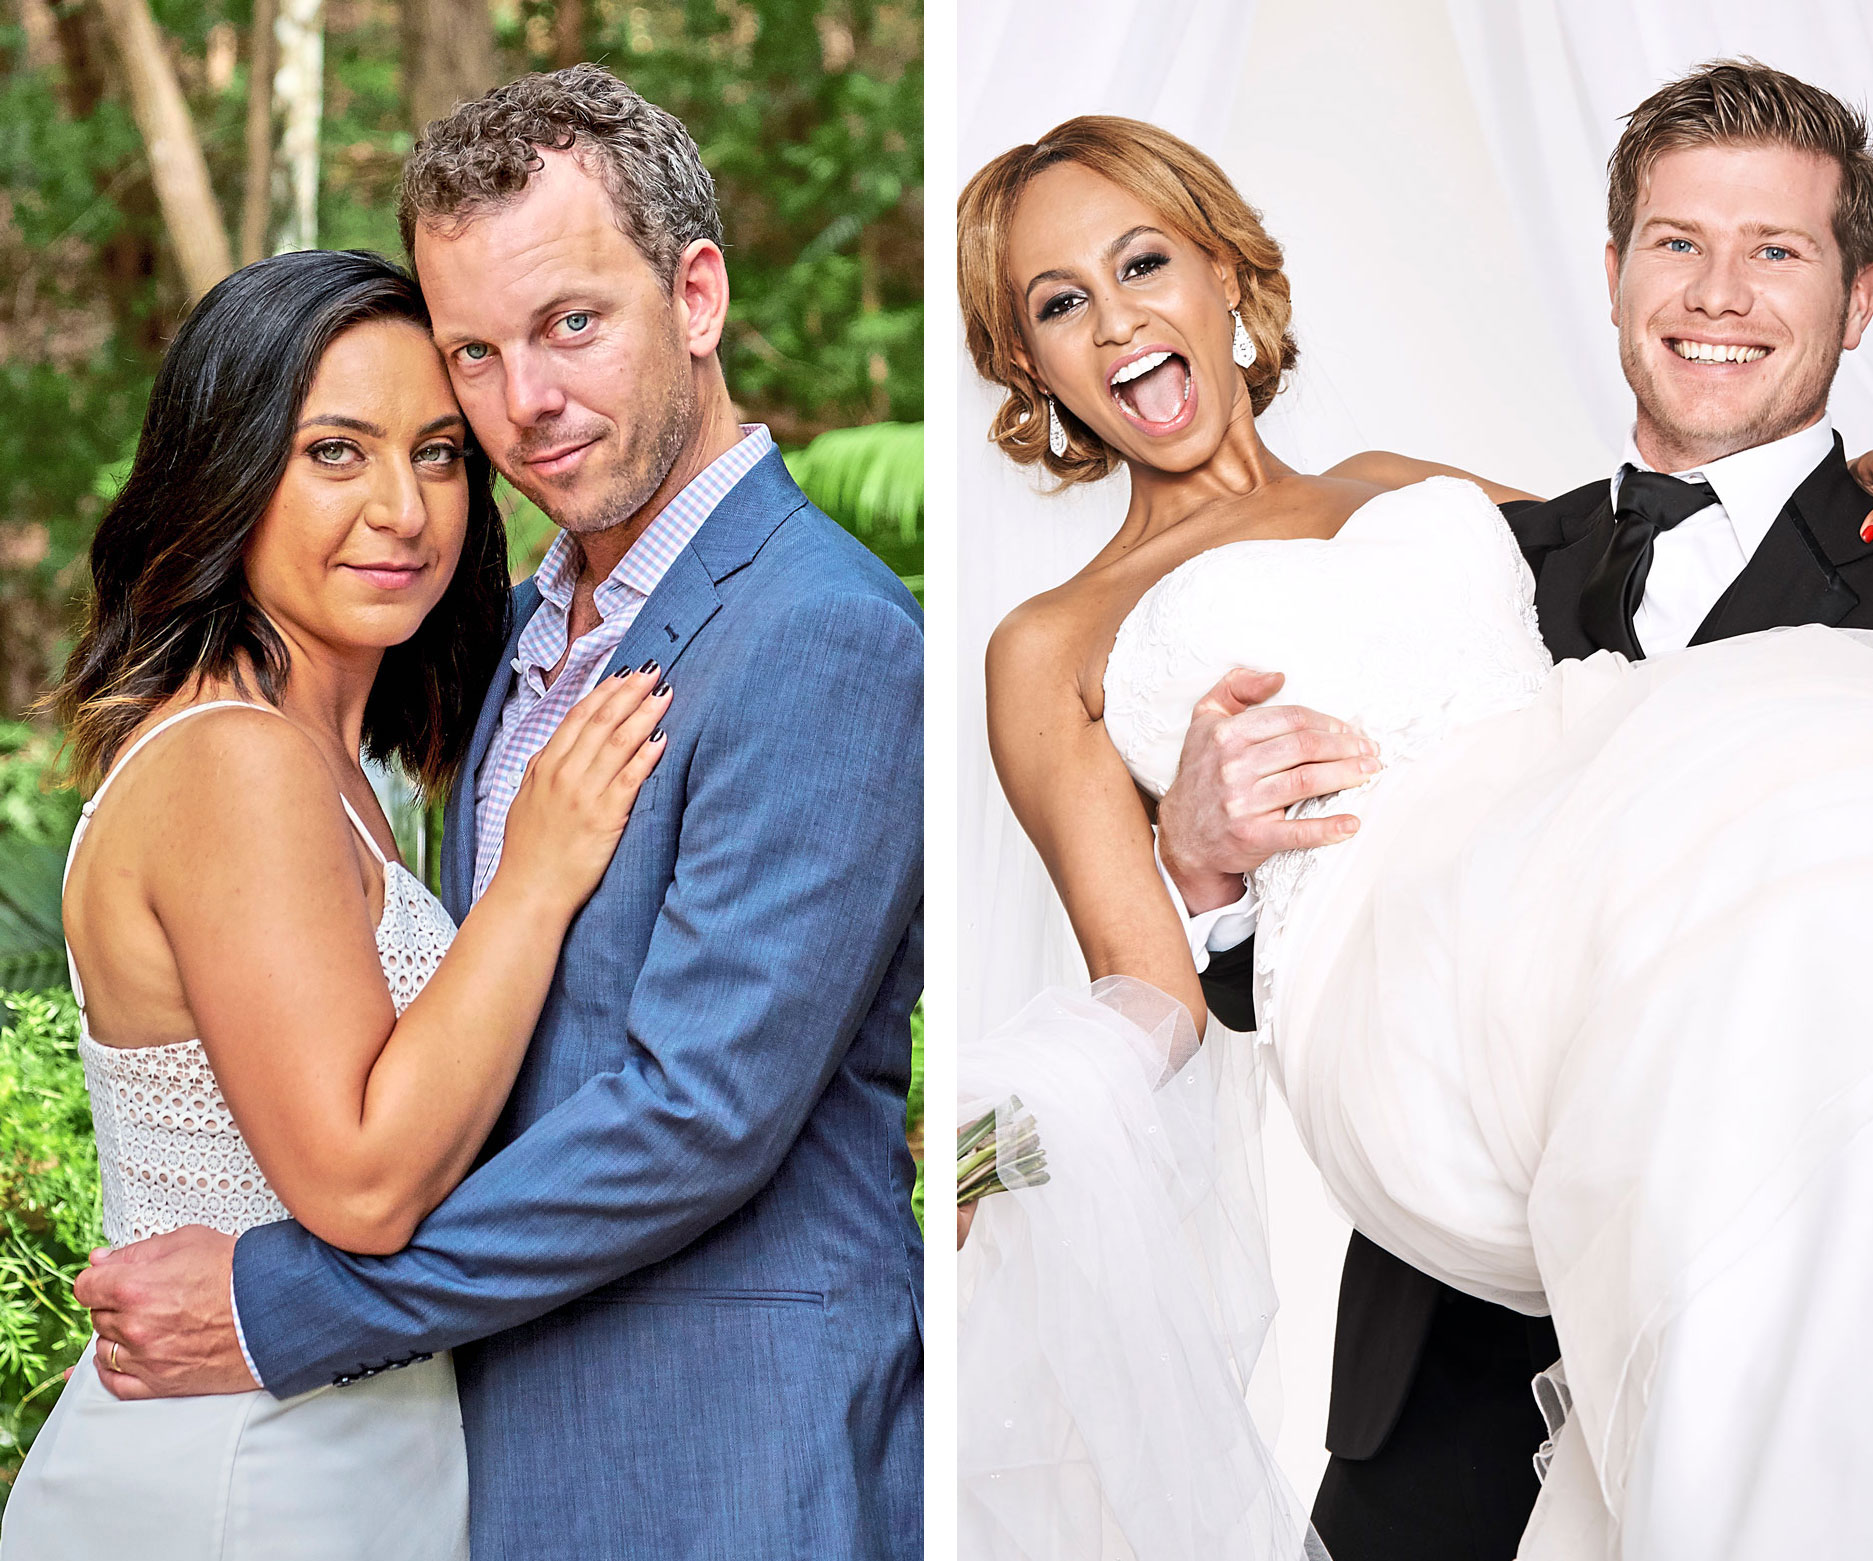 Married At First Sight: We take a look at which couples have actually lasted the distance